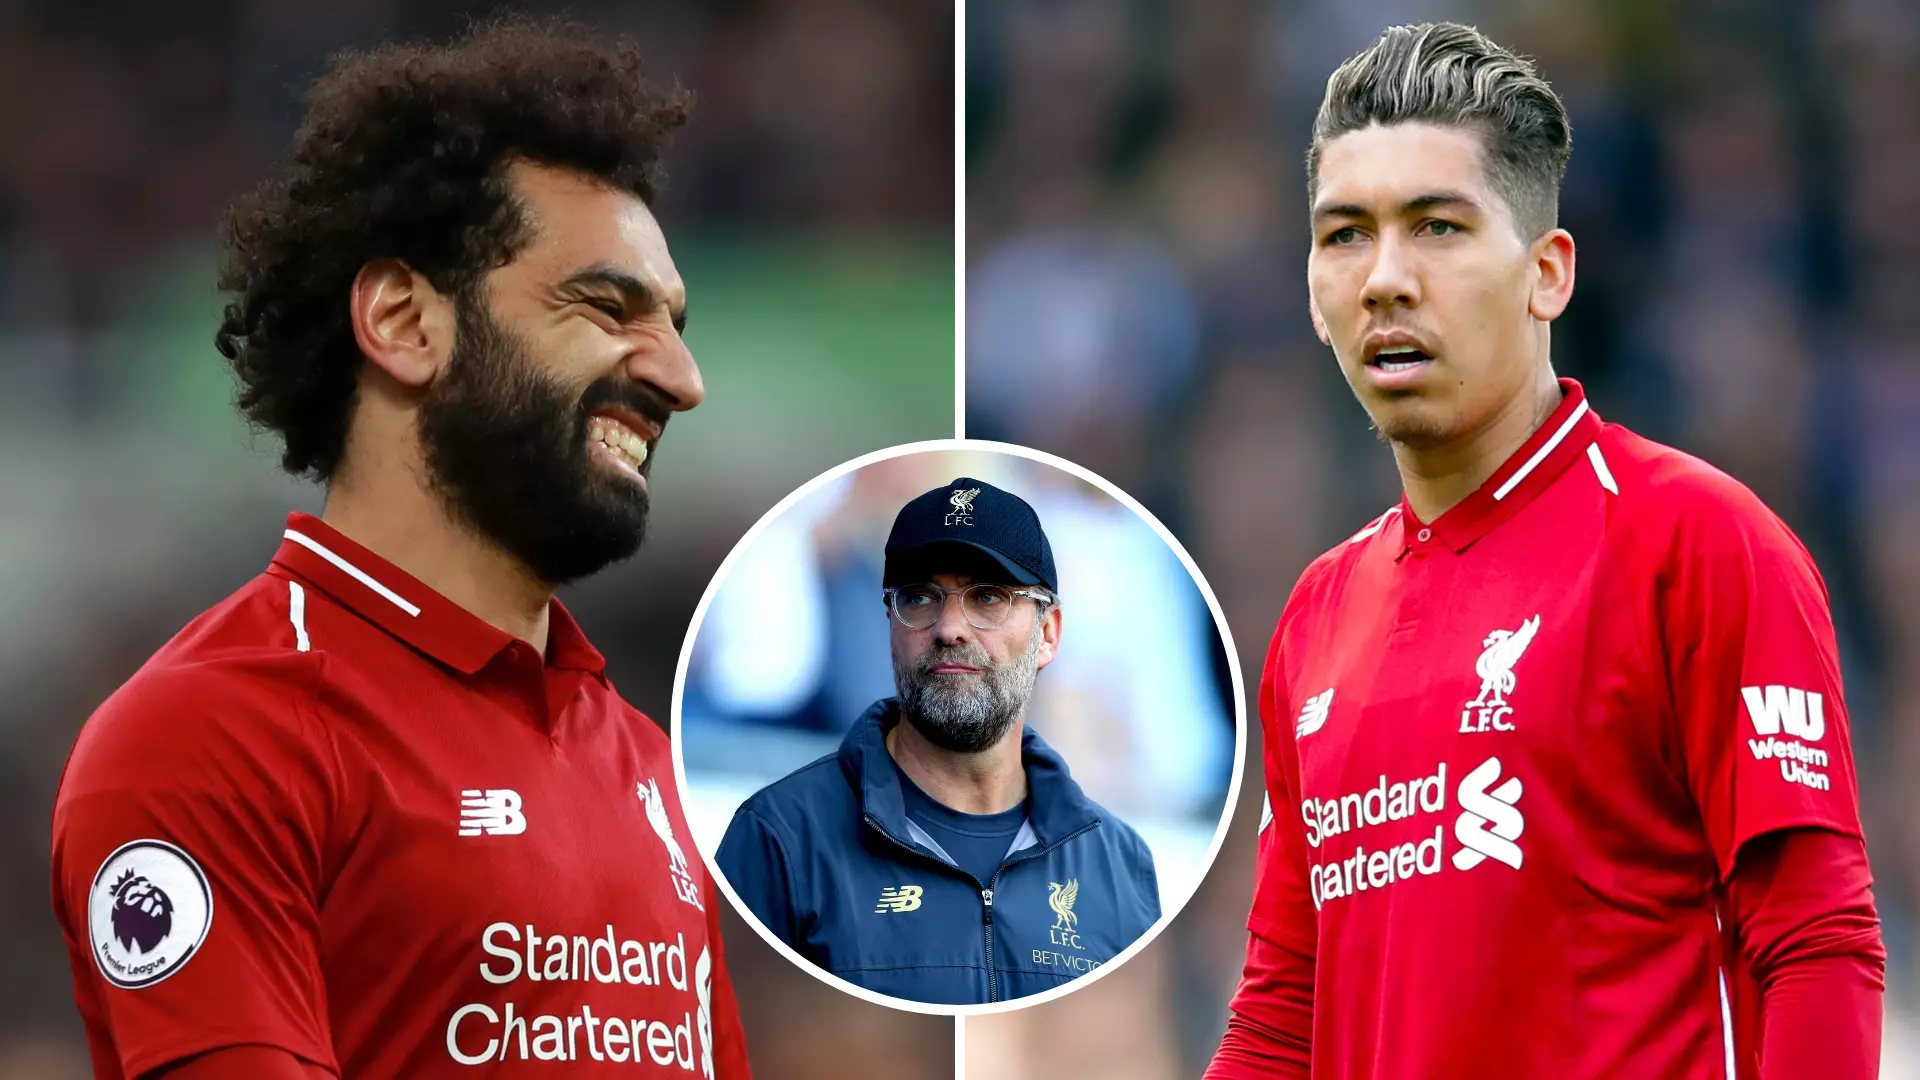 Mohamed Salah And Roberto Firmino Both Ruled Out Of Barcelona Match